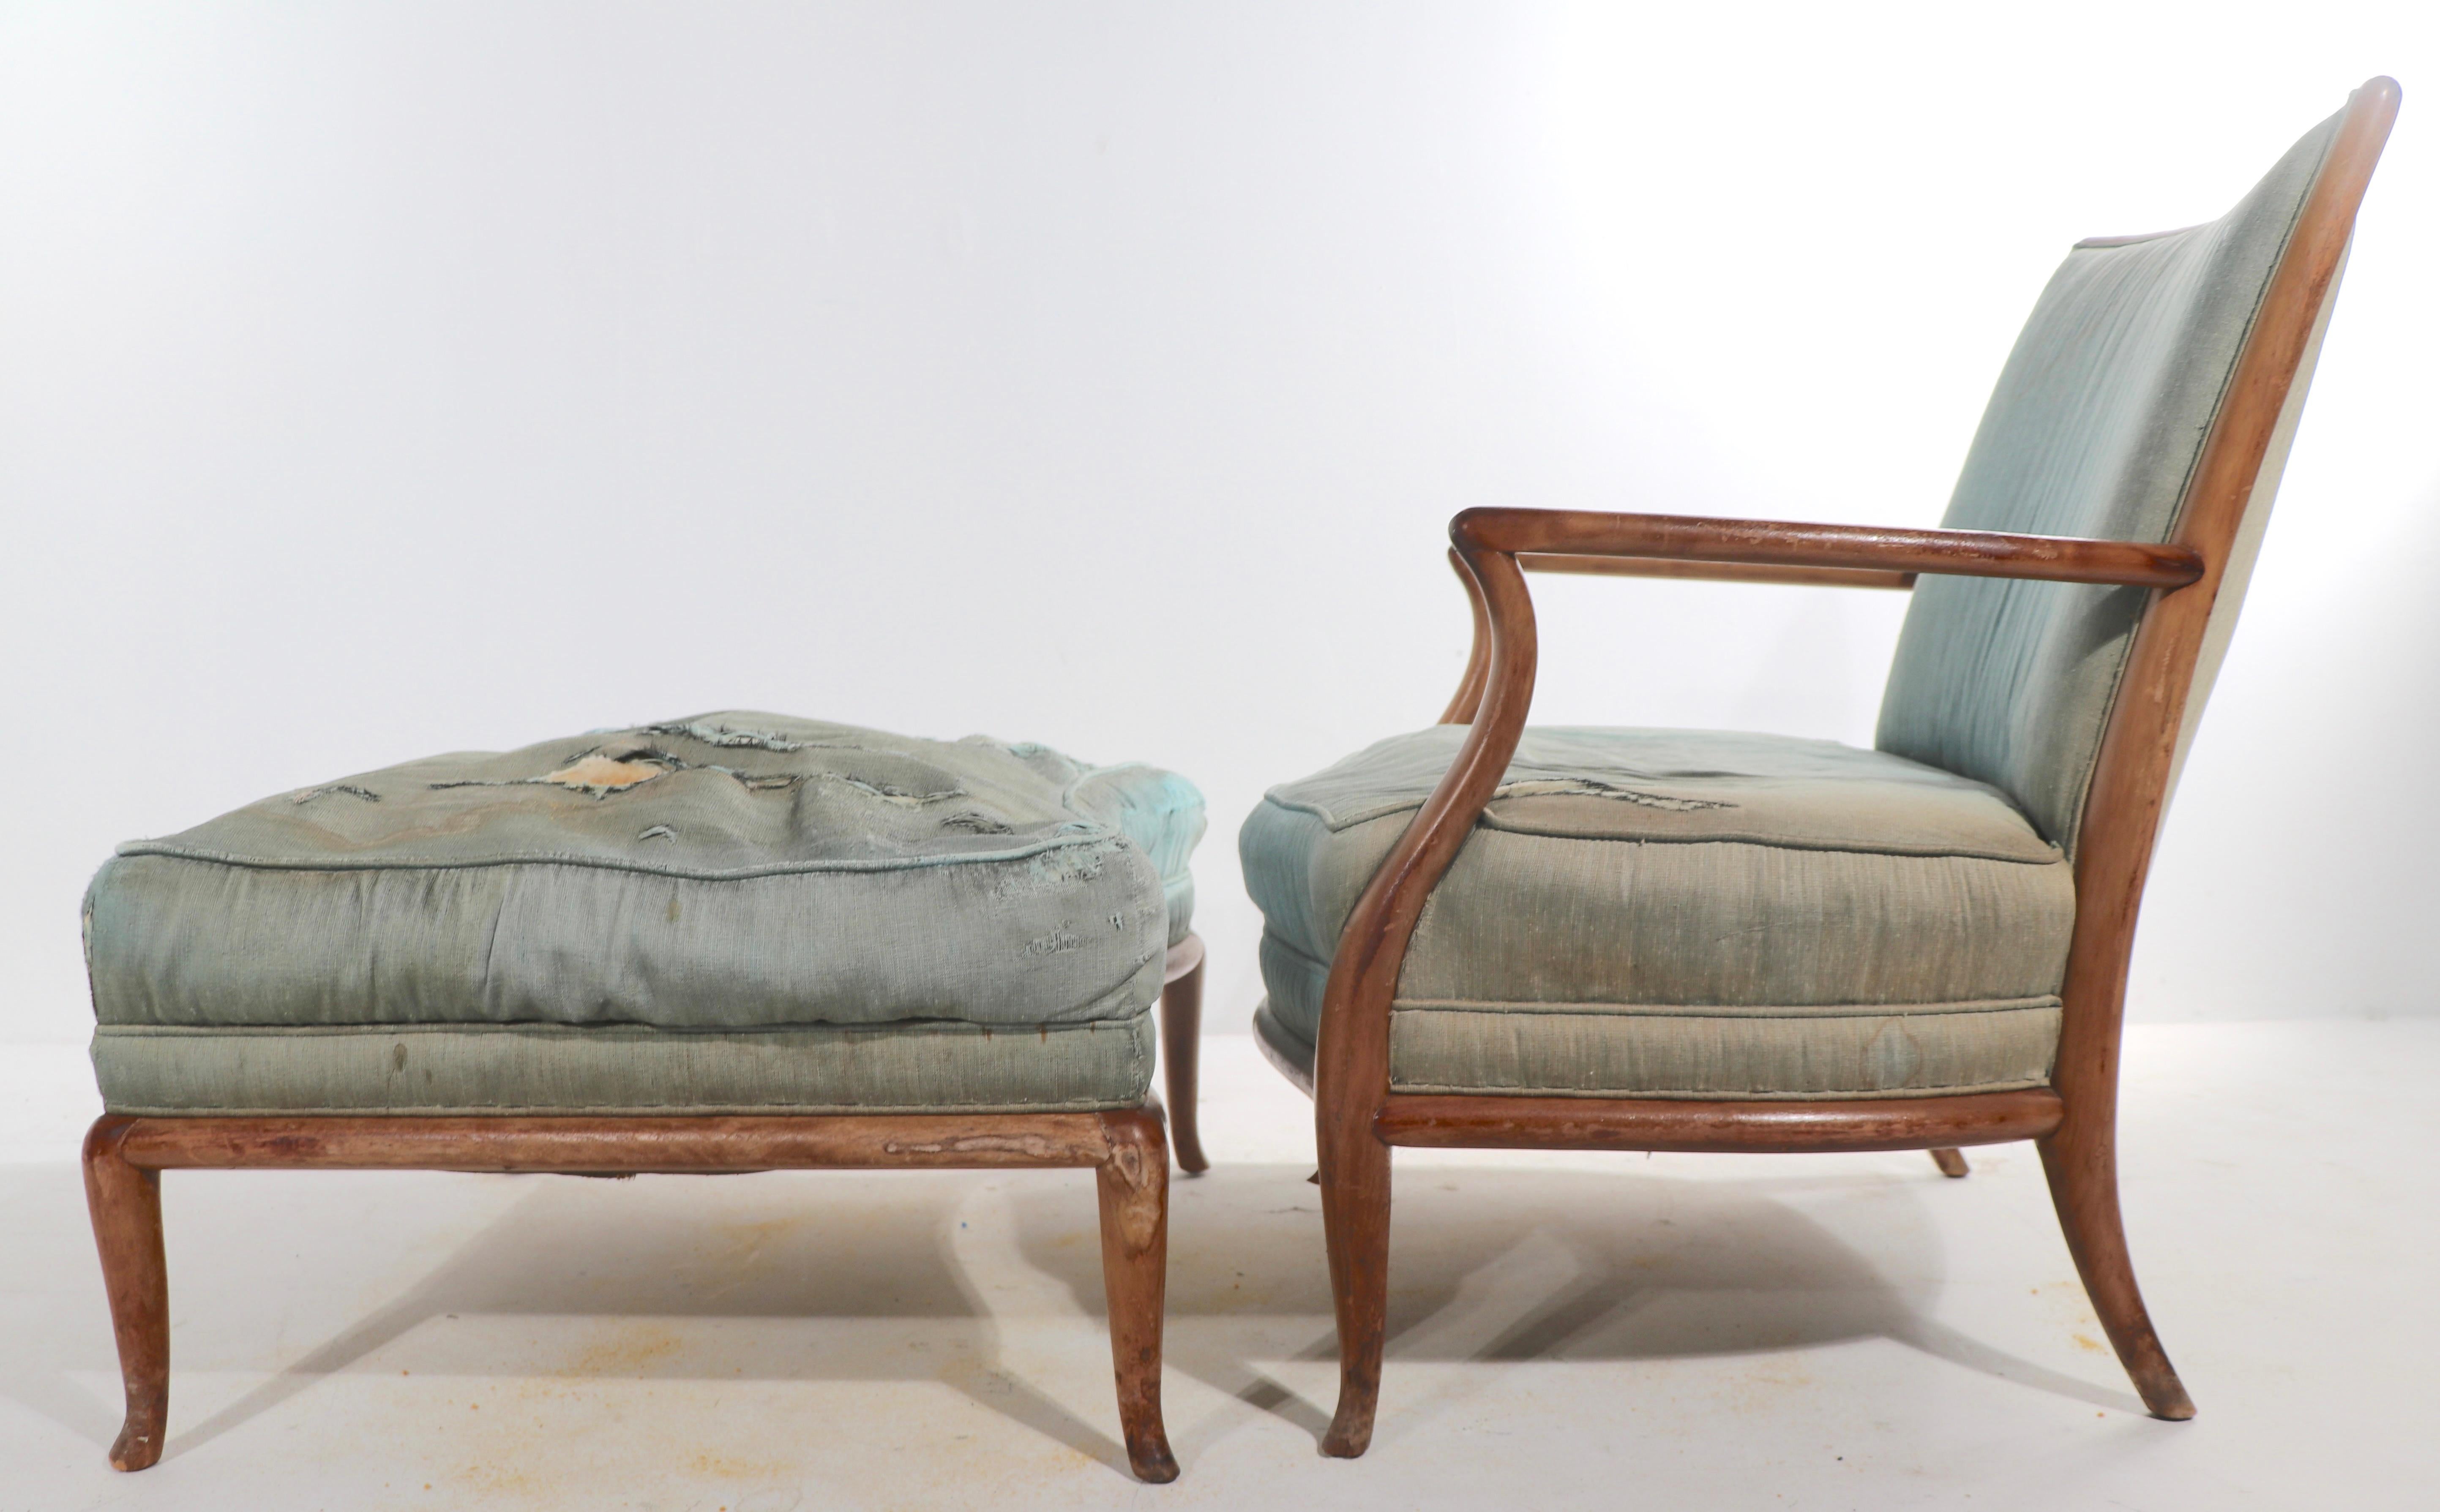 20th Century Robsjohn Gibbings French Style Lounge Chair and Ottoman Model 2024 for Widdicomb